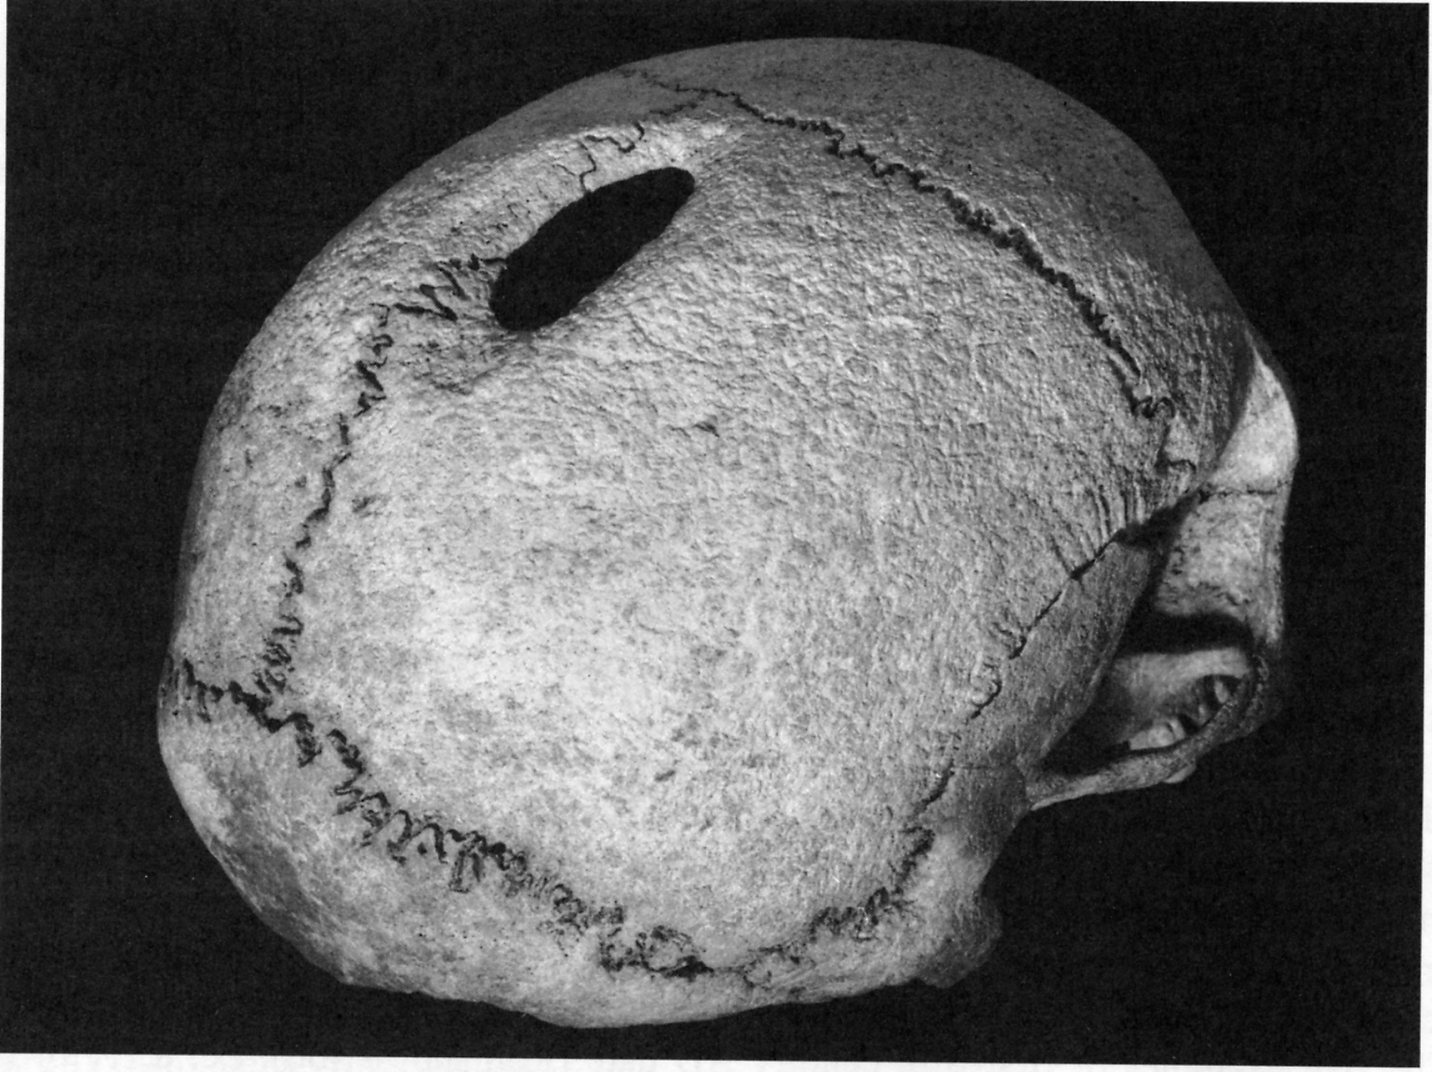 Rear view of the Oxborough Skull